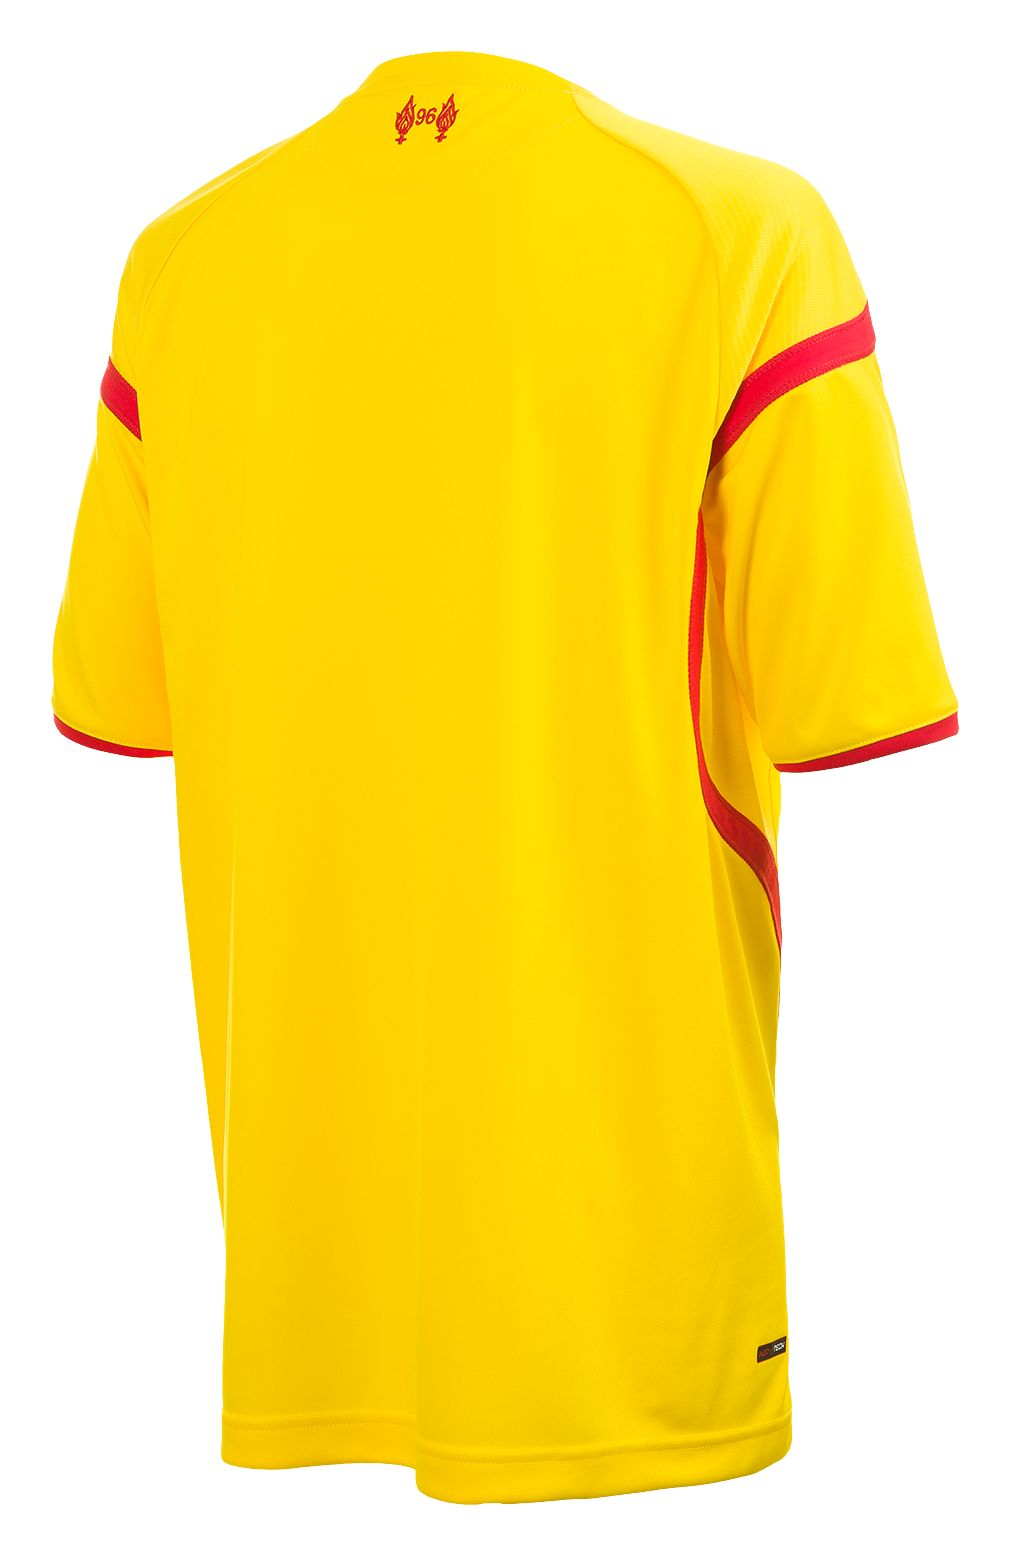 Liverpool Away Junior Short Sleeve Jersey 2014/15, Cyber Yellow with High Risk Red image number 0